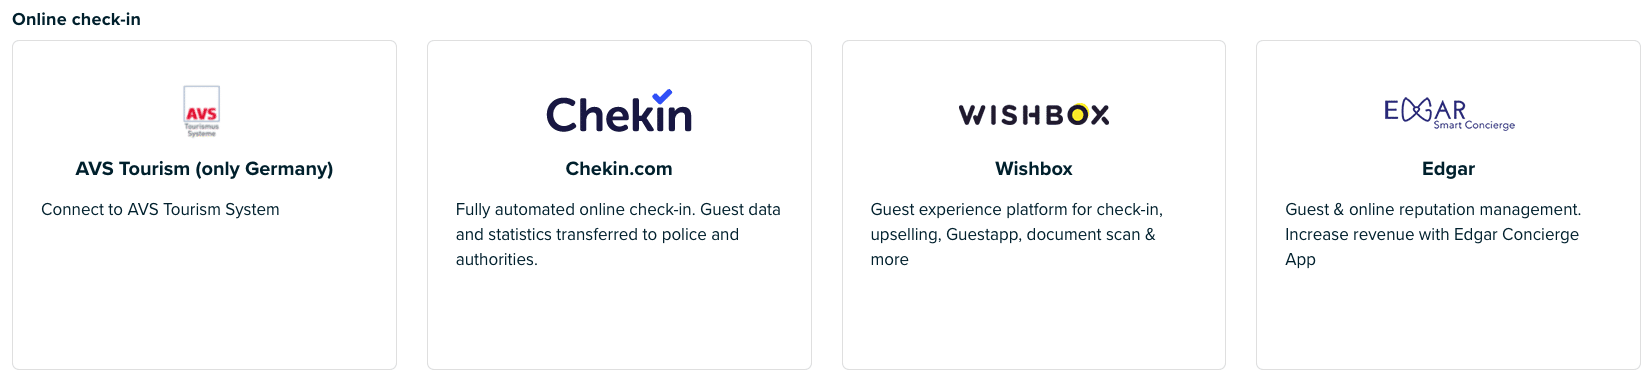 ᐅ Send guest data to authorities automatically with Chekin